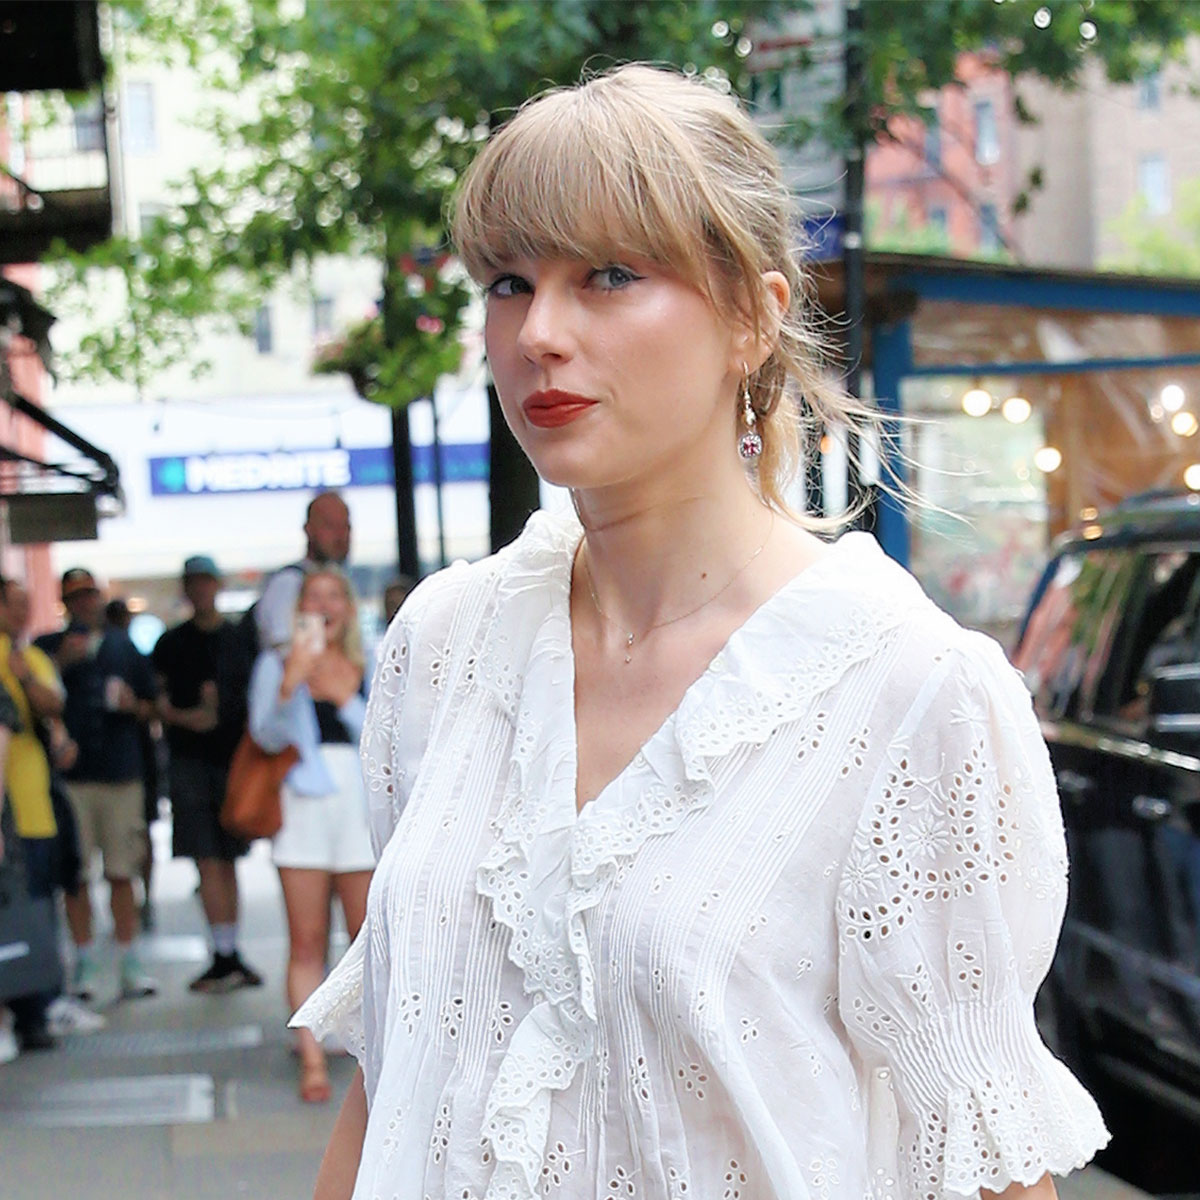 We're Still Not Over The Pleated Mini Skirt Taylor Swift Wore In NYC